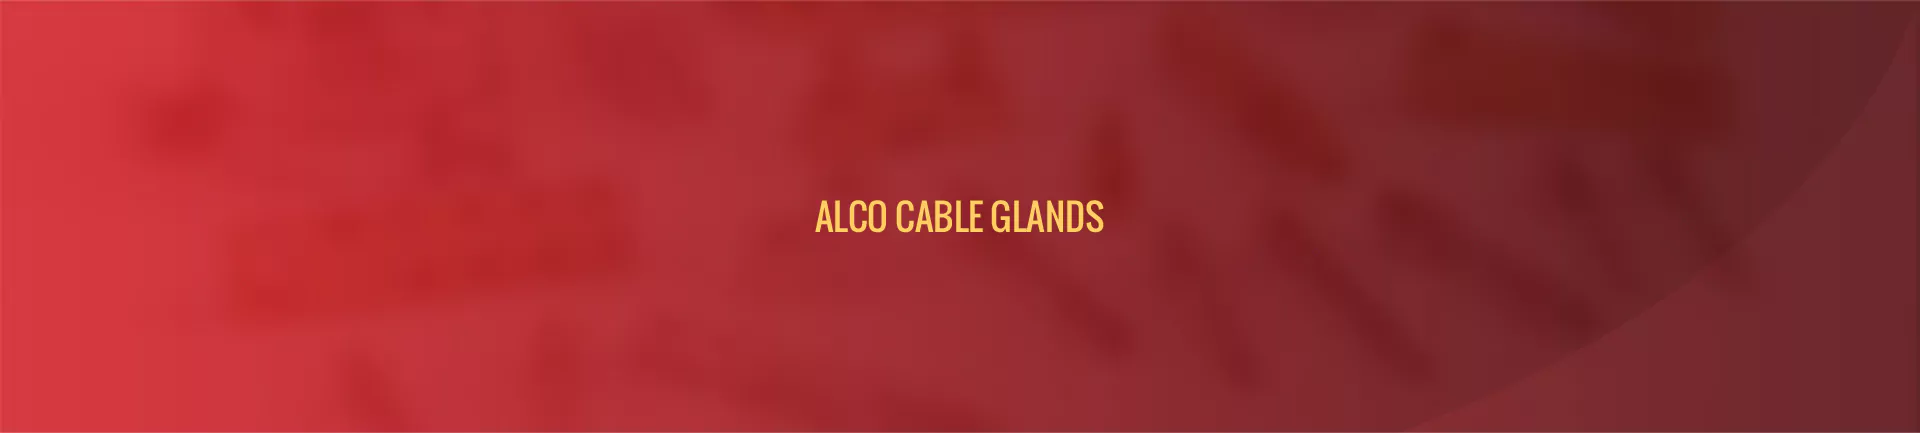 alco-cable-glands-banner